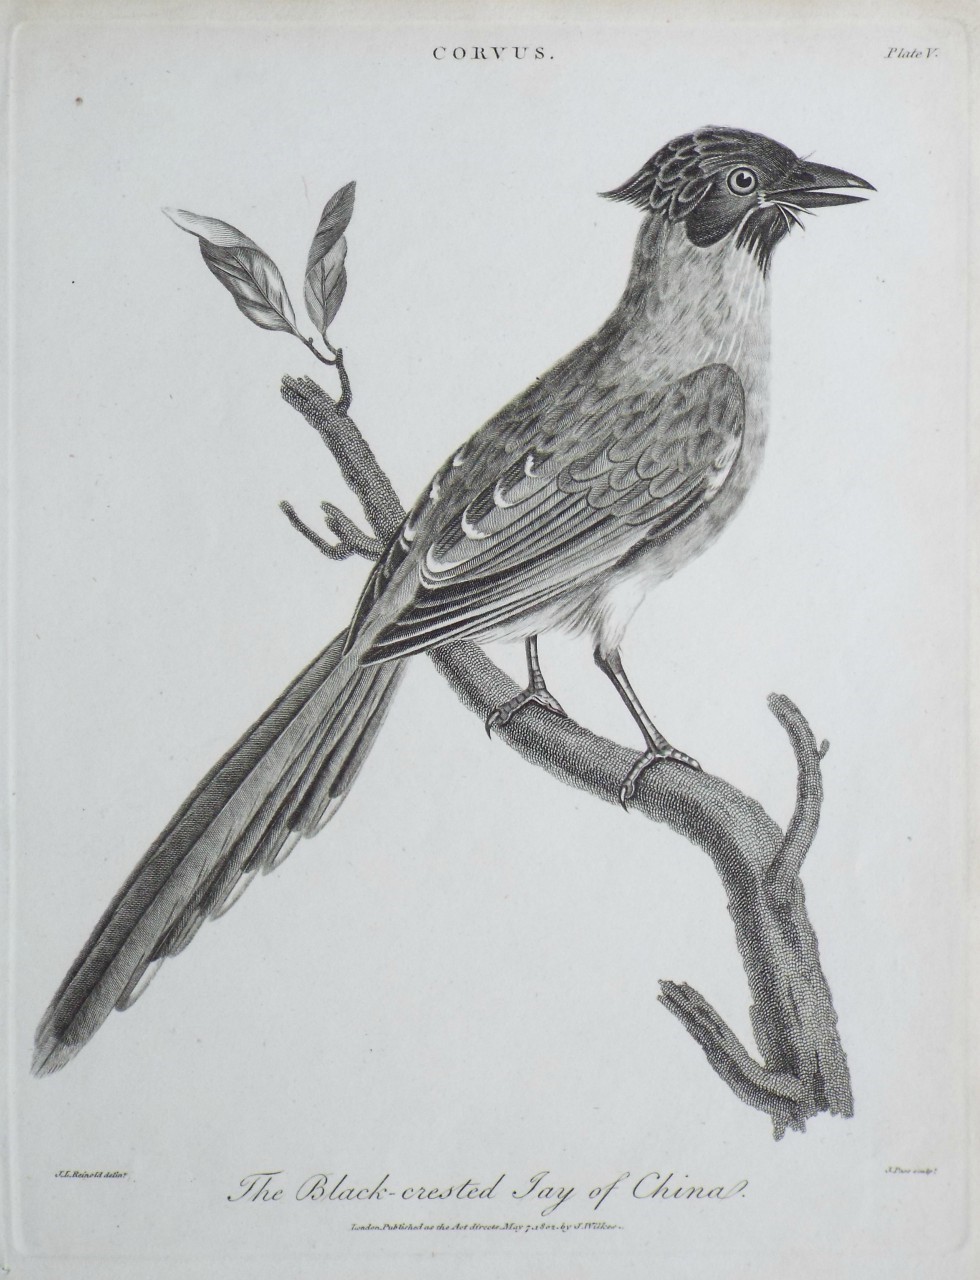 Print - Corvus. The Black-crested Jay of China. - Pass